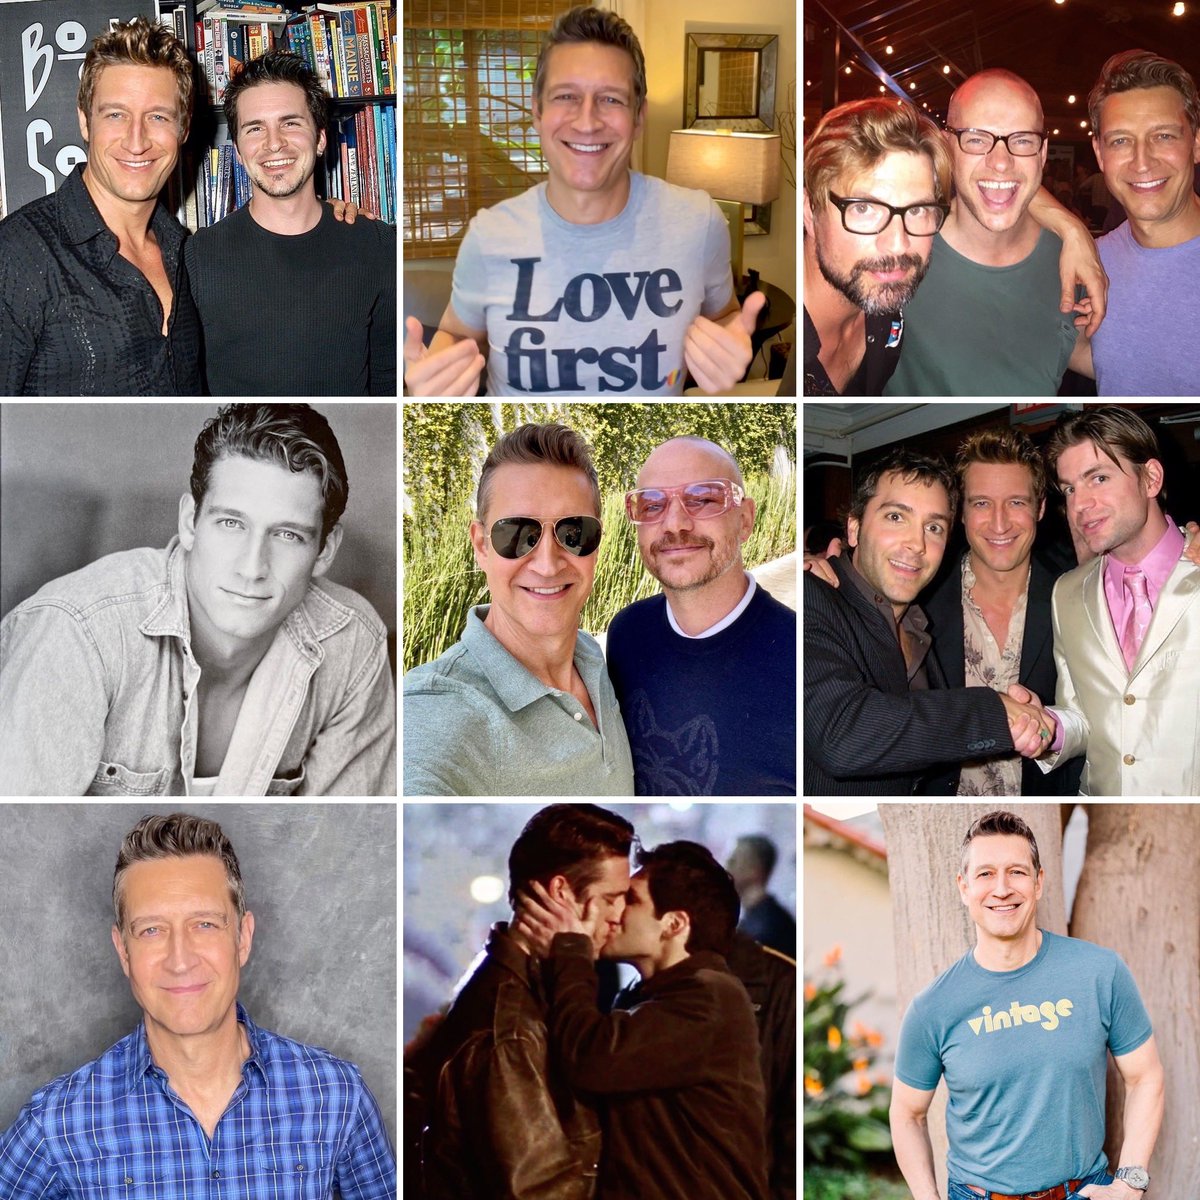 As the year ends, here are my annual top nine for 2022. #QAF leads the charge with other moments past and present. Not included is the connection I’ve gotten to share with all of you this year. Thank you for being on this journey together. Excited for more in 2023! #HappyNewYear!